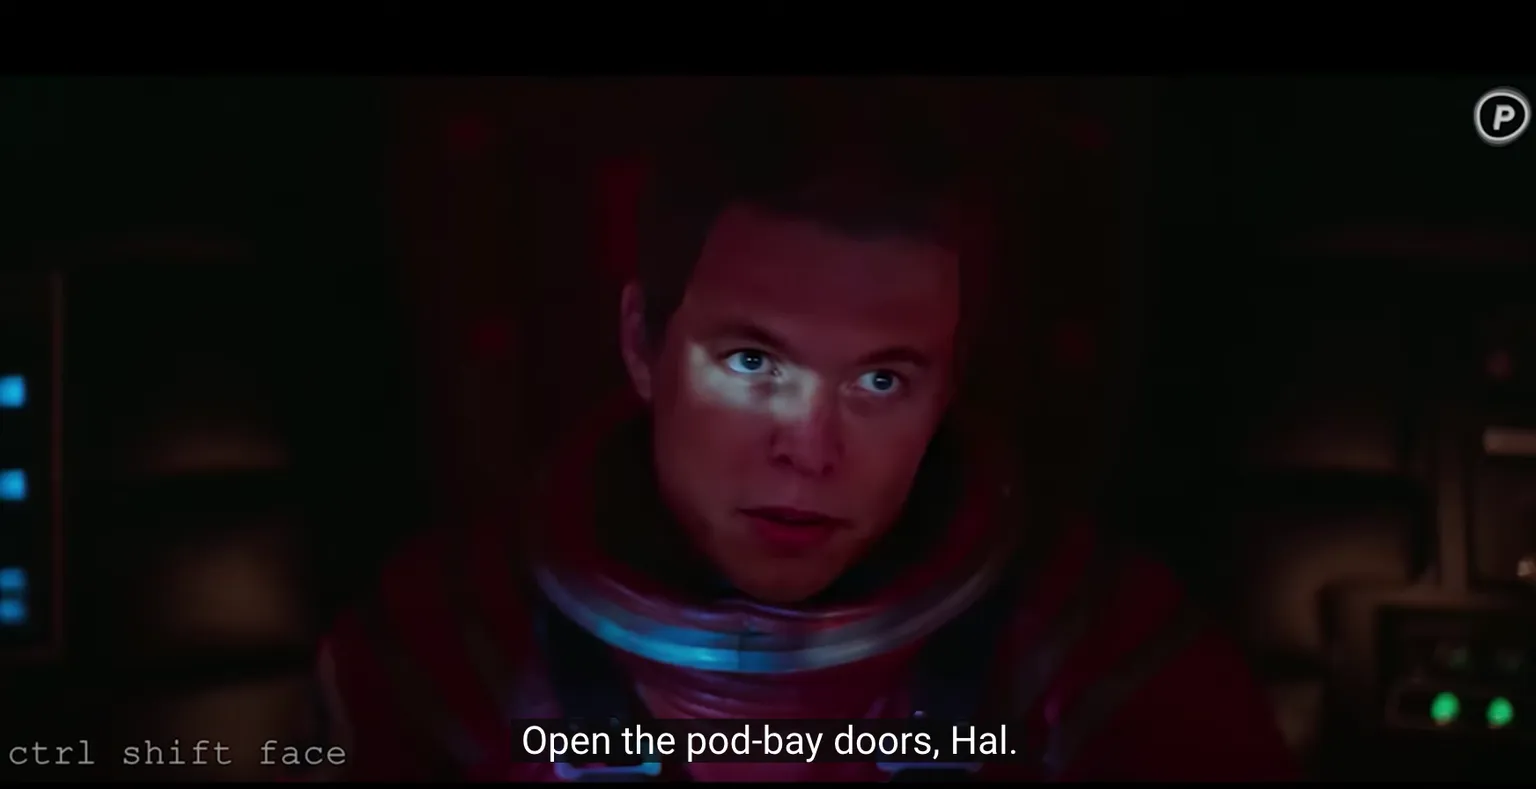 Elon Musk as Dave in 2001: A Space Odyssey (Image: YouTube)